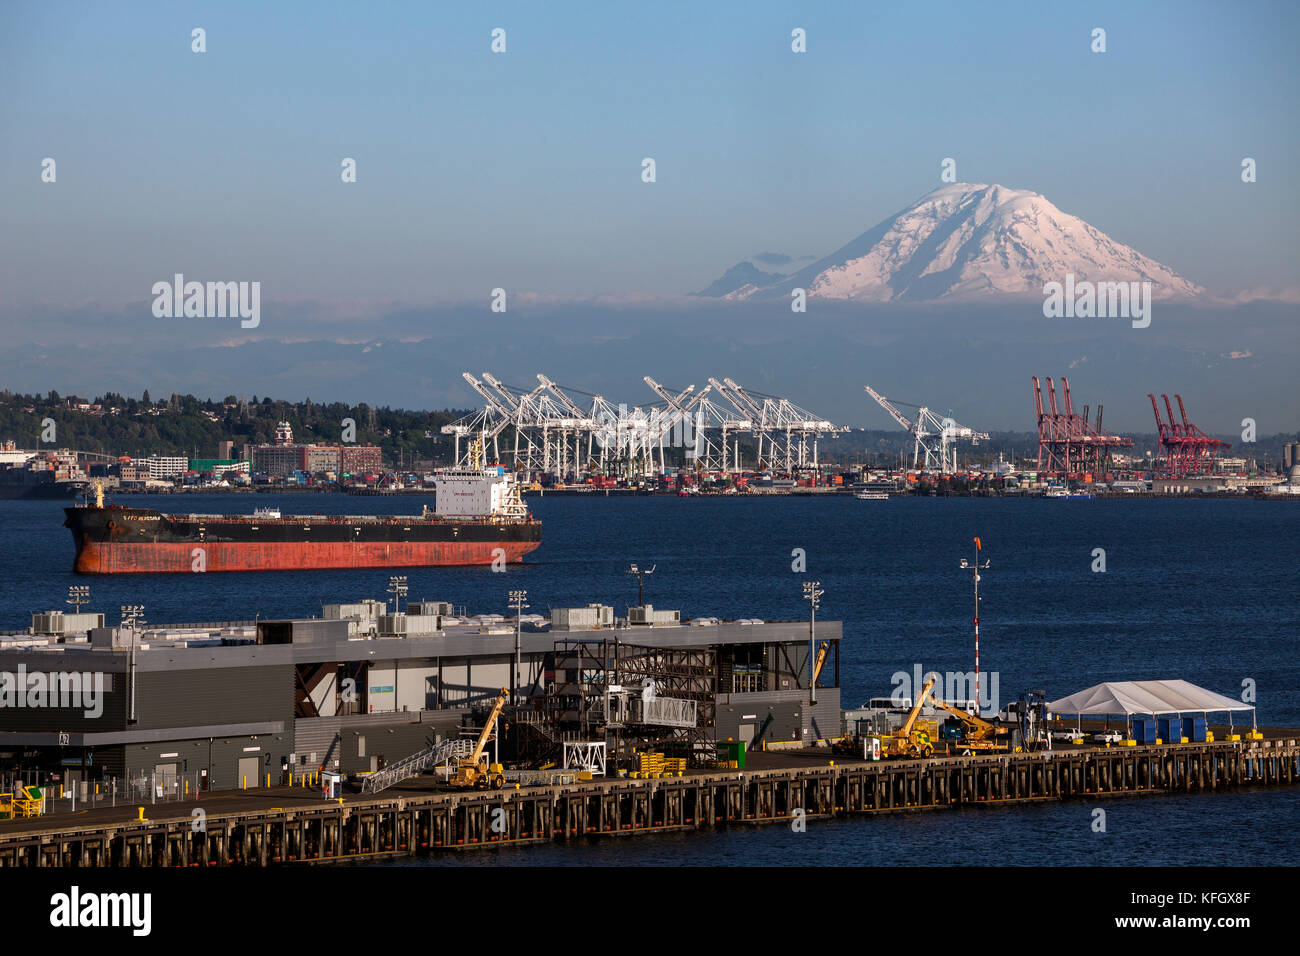 WA14074-00...WASHINGTON -Seattle's Elliott Bay and the industrial shipping area with Mount Rainier in the distance Stock Photo